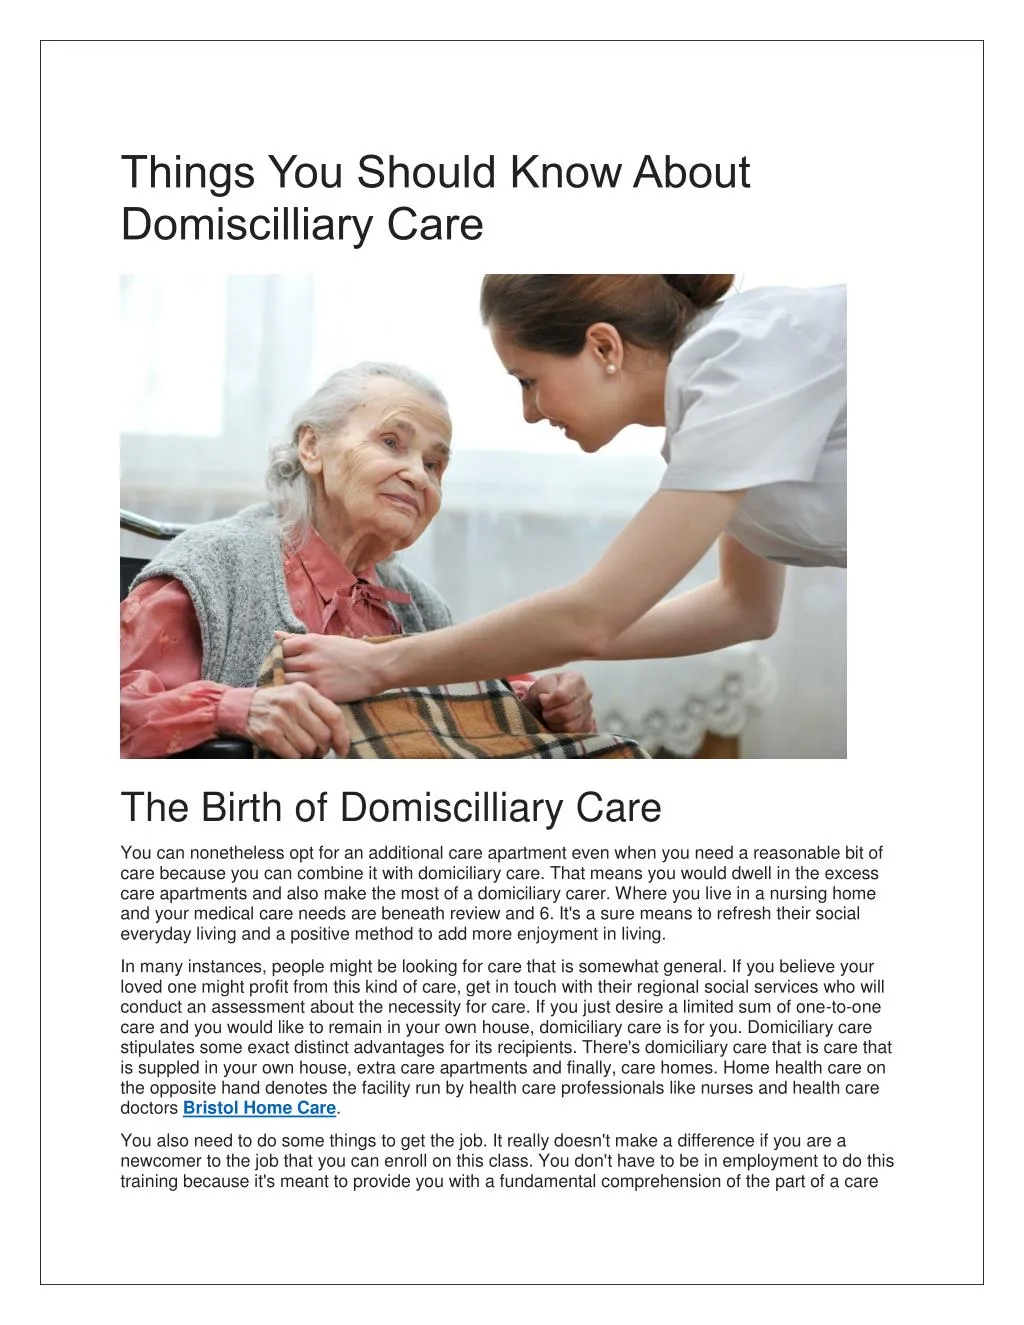 things you should know about domiscilliary care